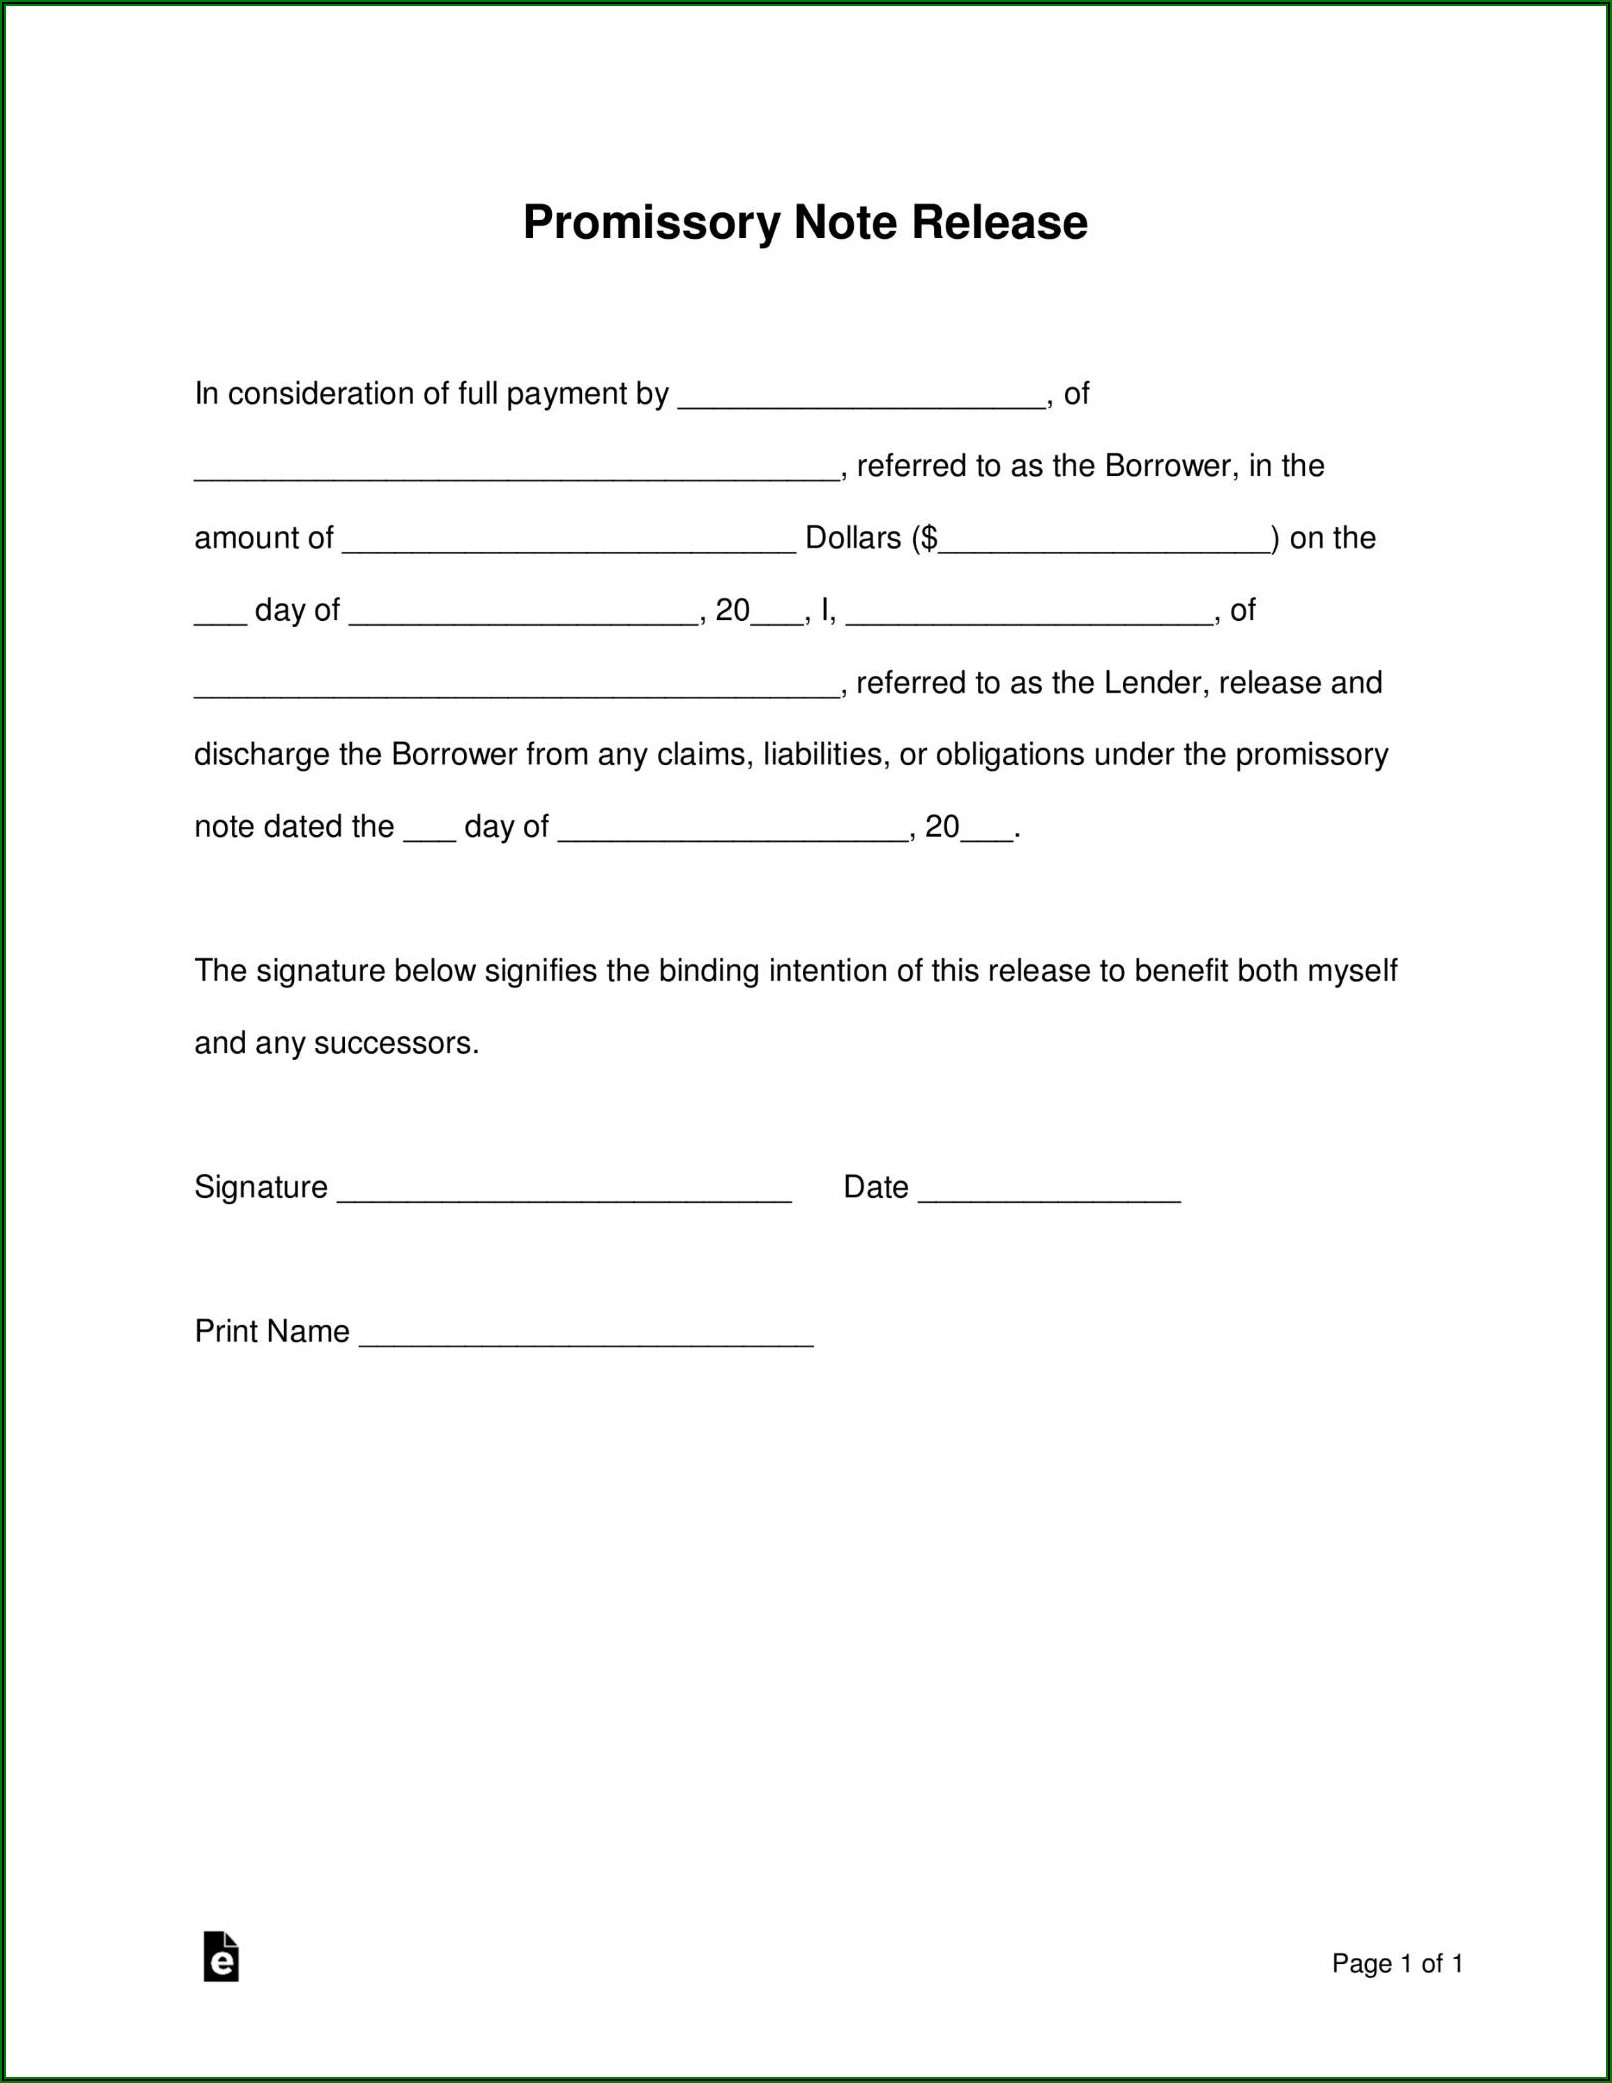 Promissory Note Sample Form